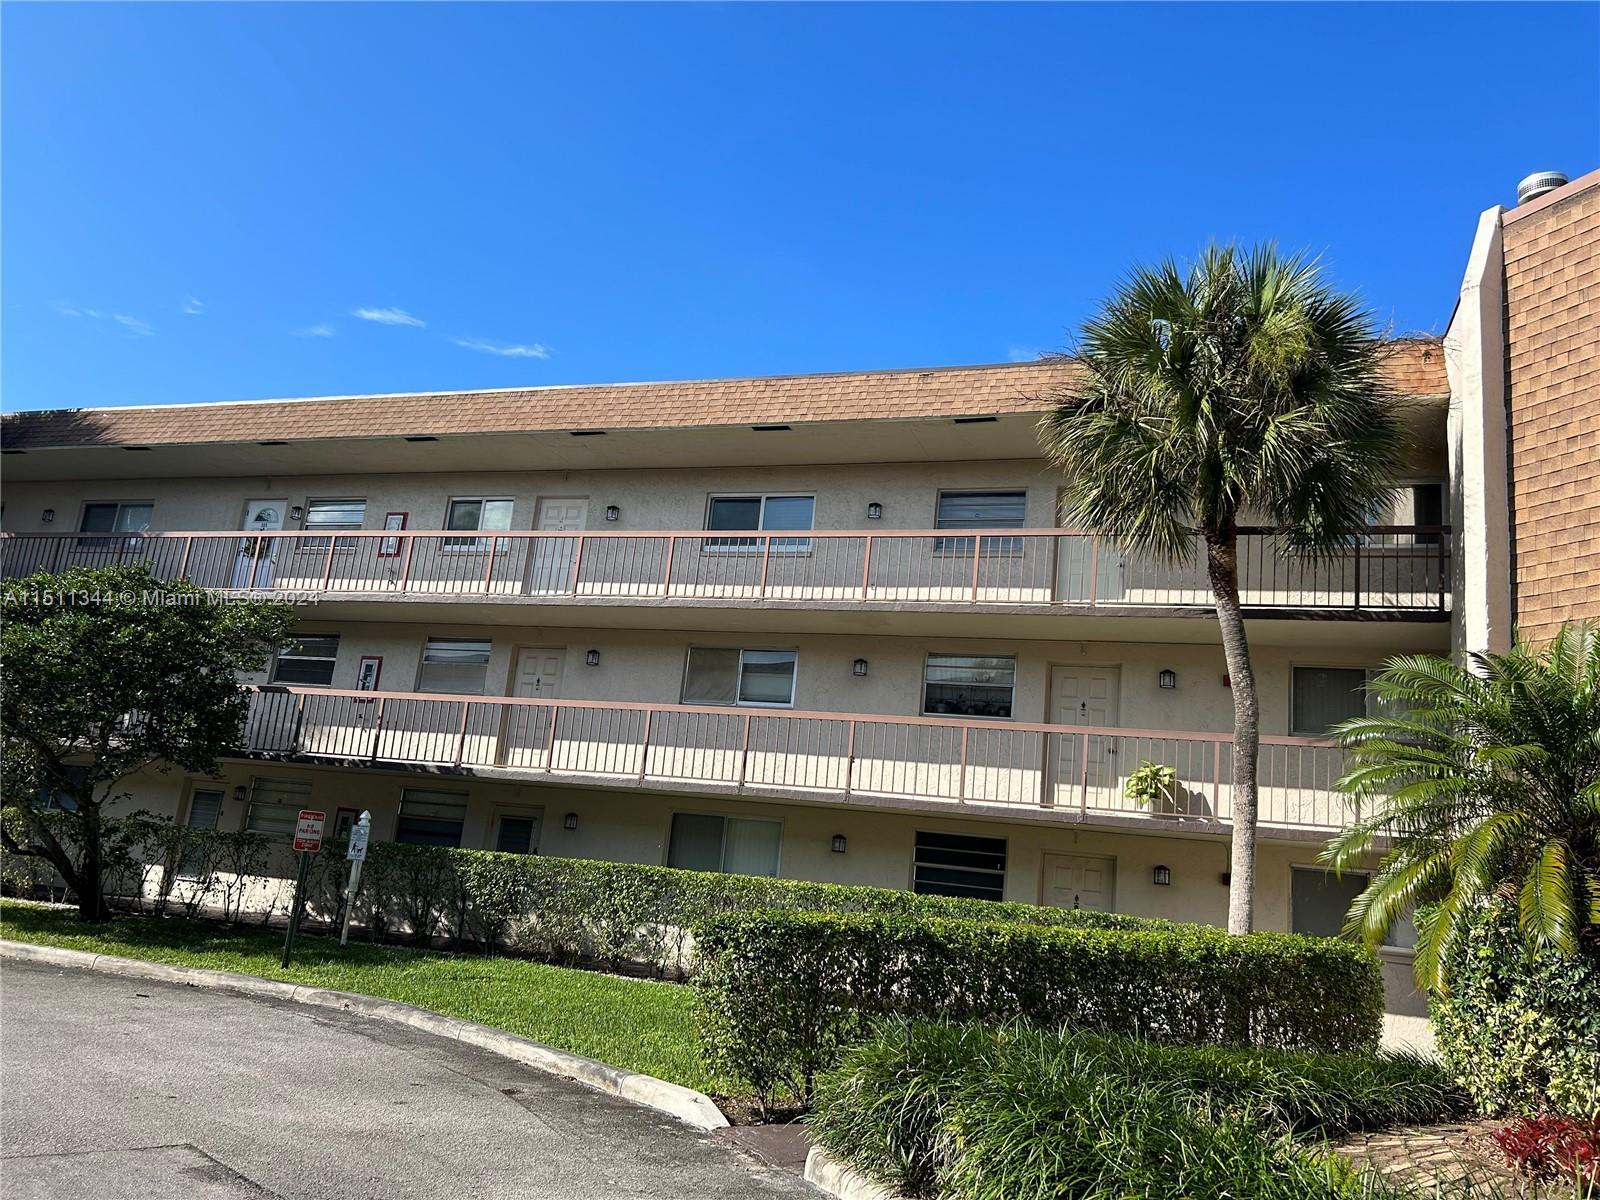 Photo of 7480 NW 17th St #305 in Plantation, FL